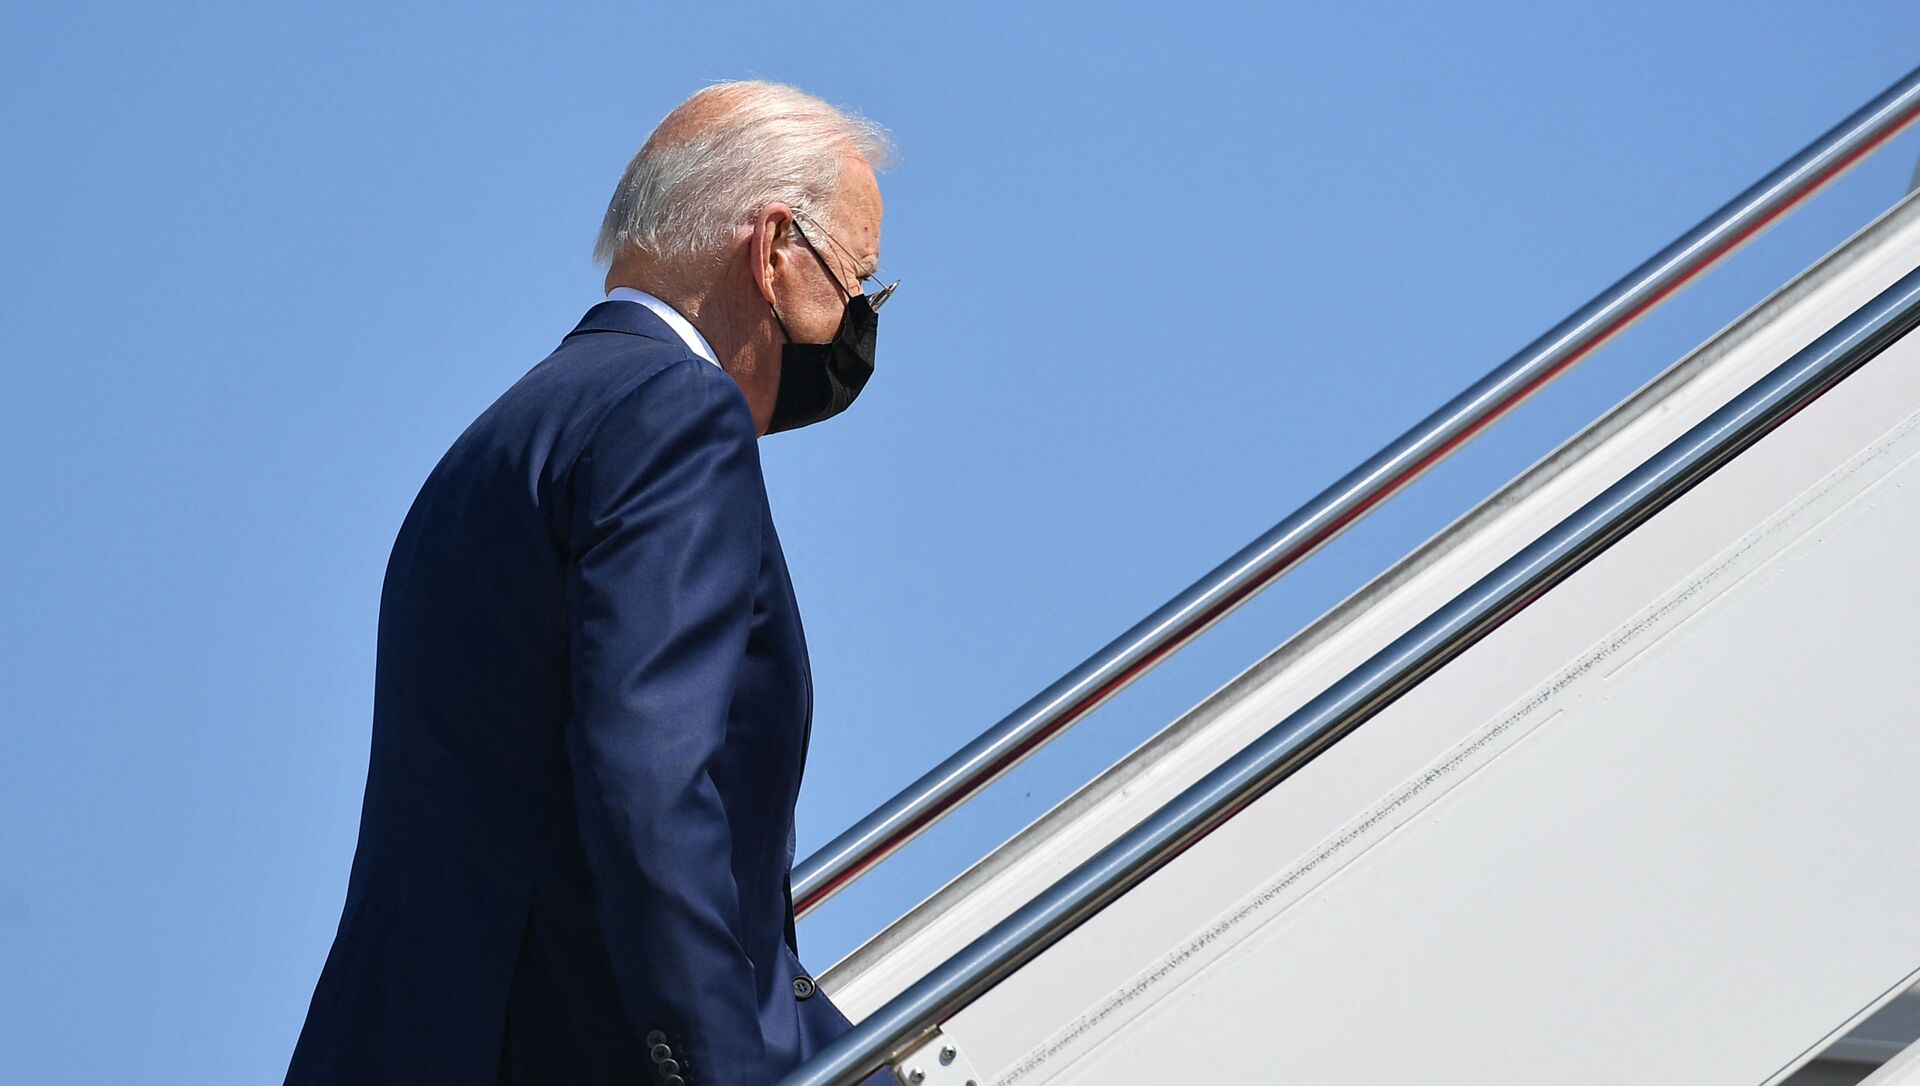 US President Joe Biden makes his way to board Air Force One before departing from Andrews Air Force Base, Maryland on September 3, 2021 - Sputnik International, 1920, 04.09.2021